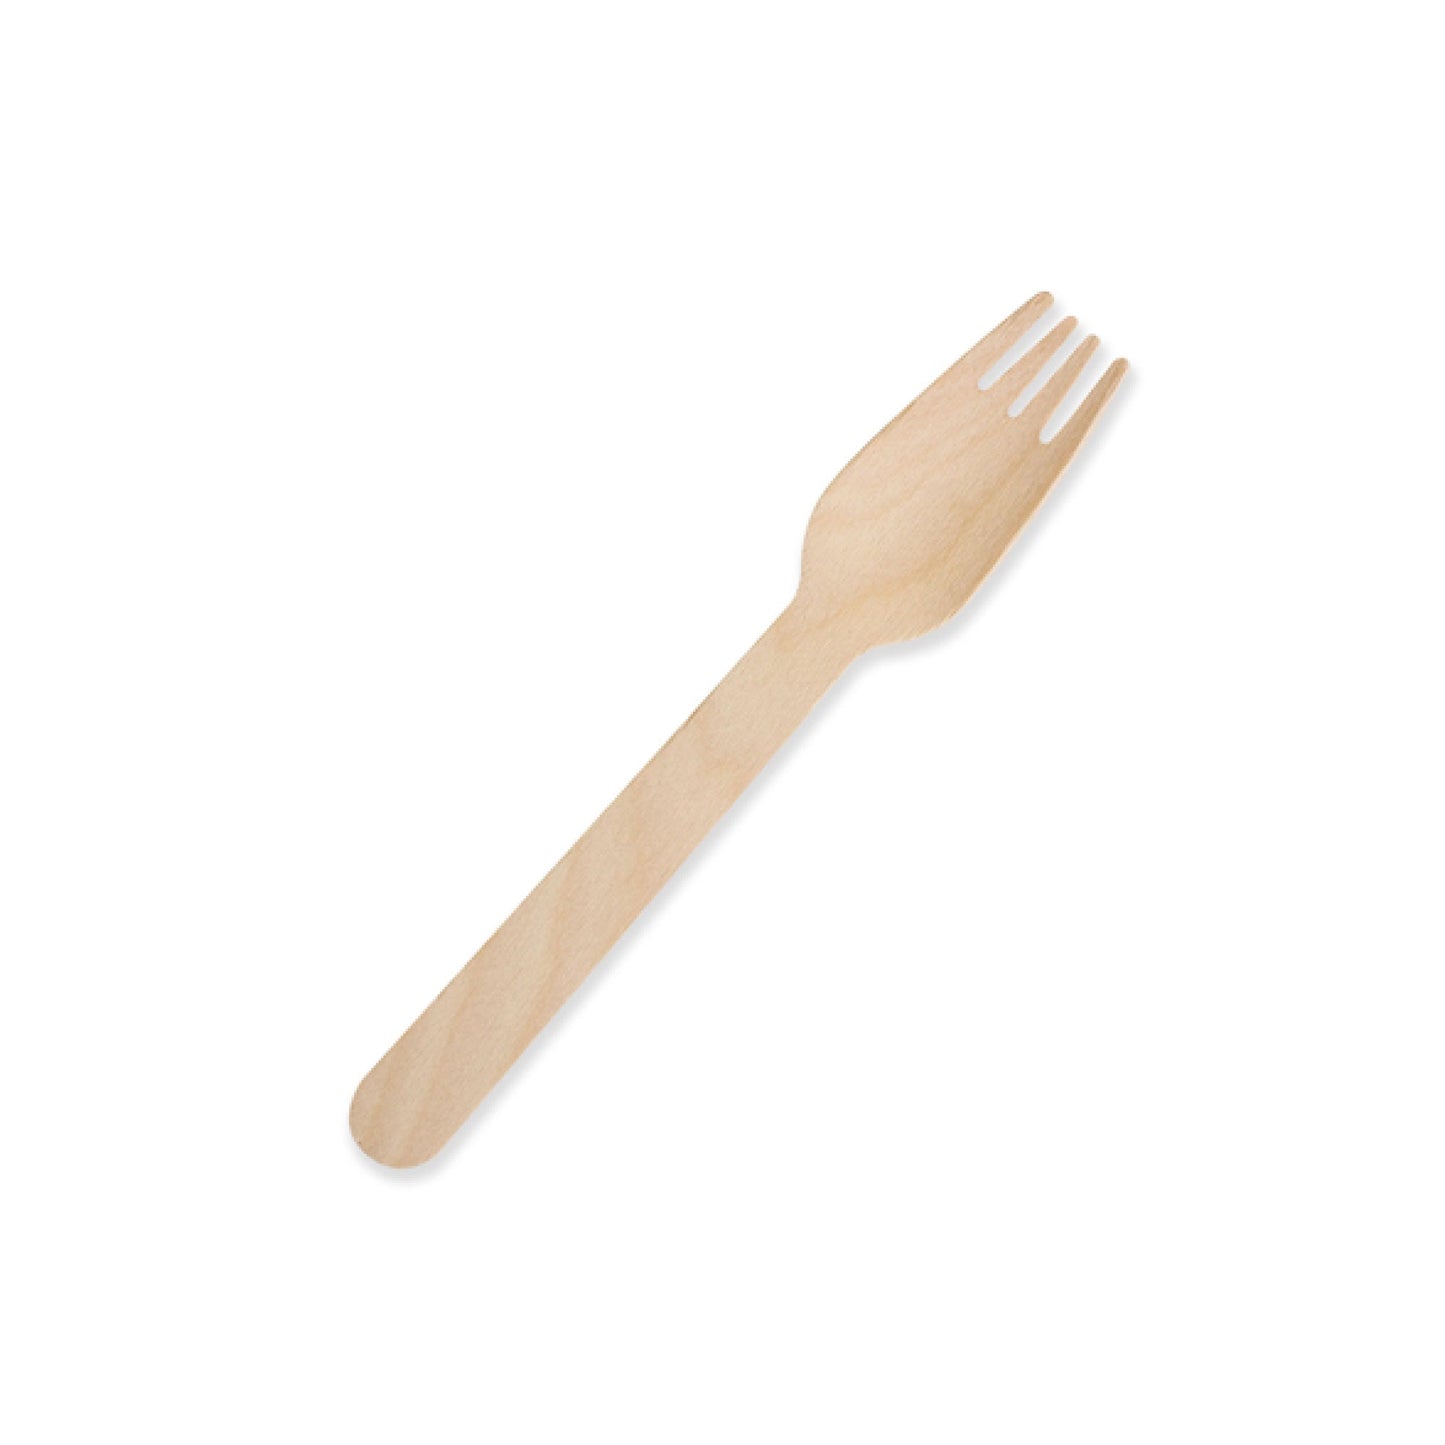 Bulk Compostable Wooden Forks - Biodegradable Eco Friendly Disposable Cutlery